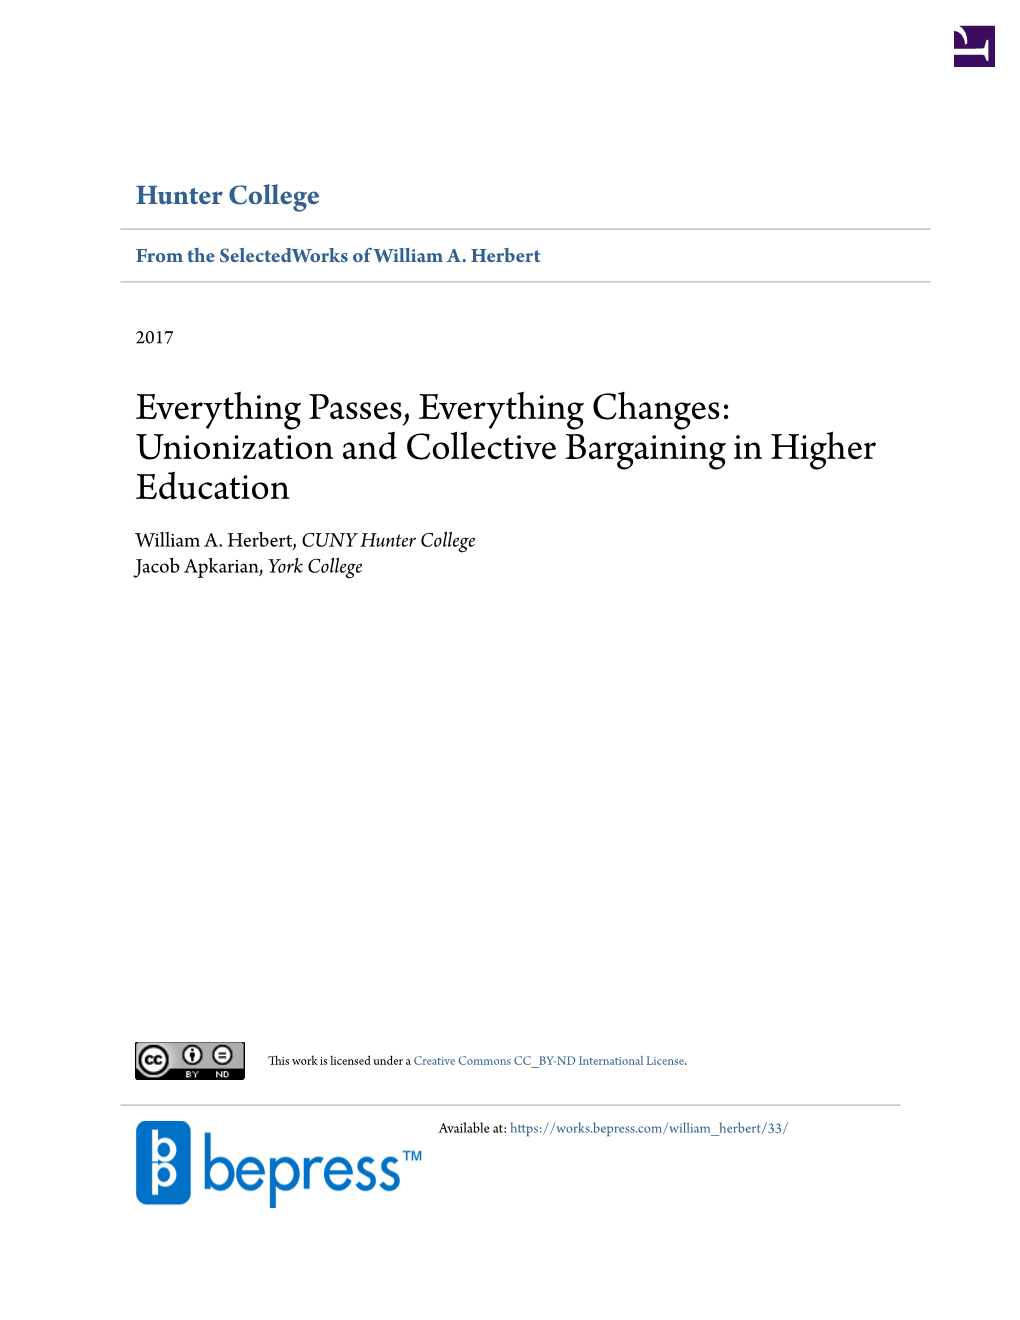 Unionization and Collective Bargaining in Higher Education William A